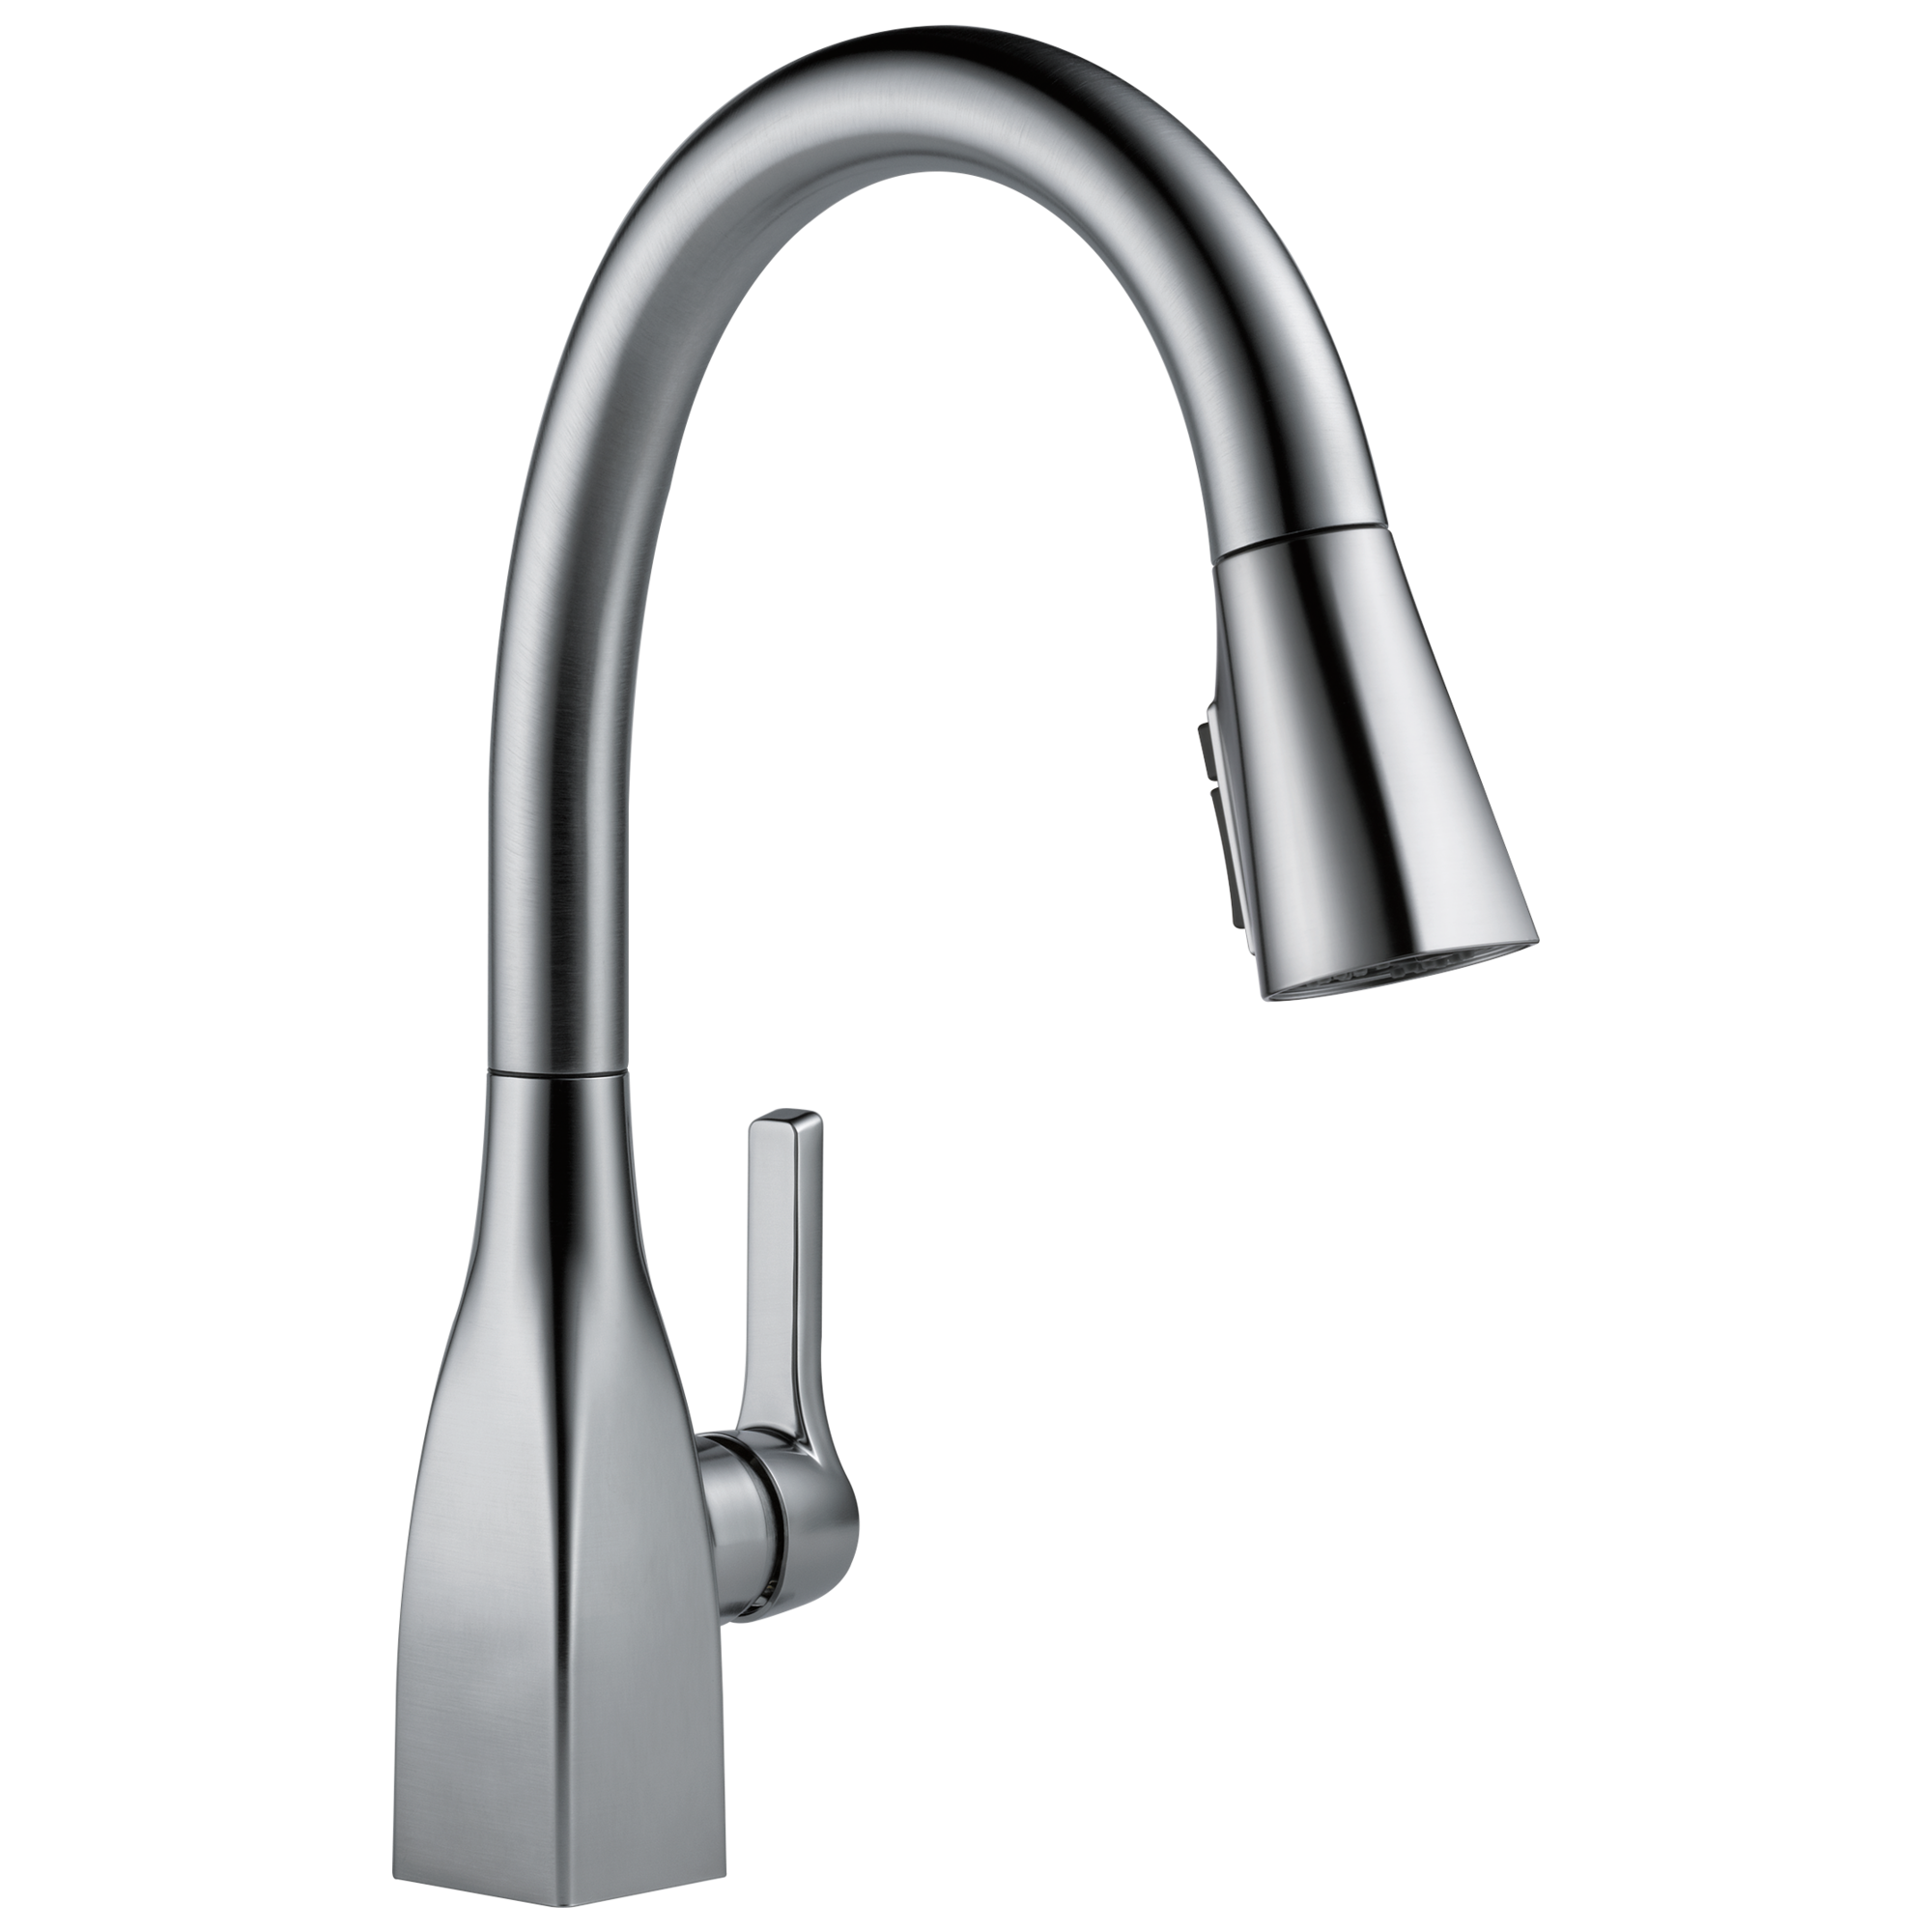 Delta Mateo Single Handle Pull-Down Kitchen Faucet